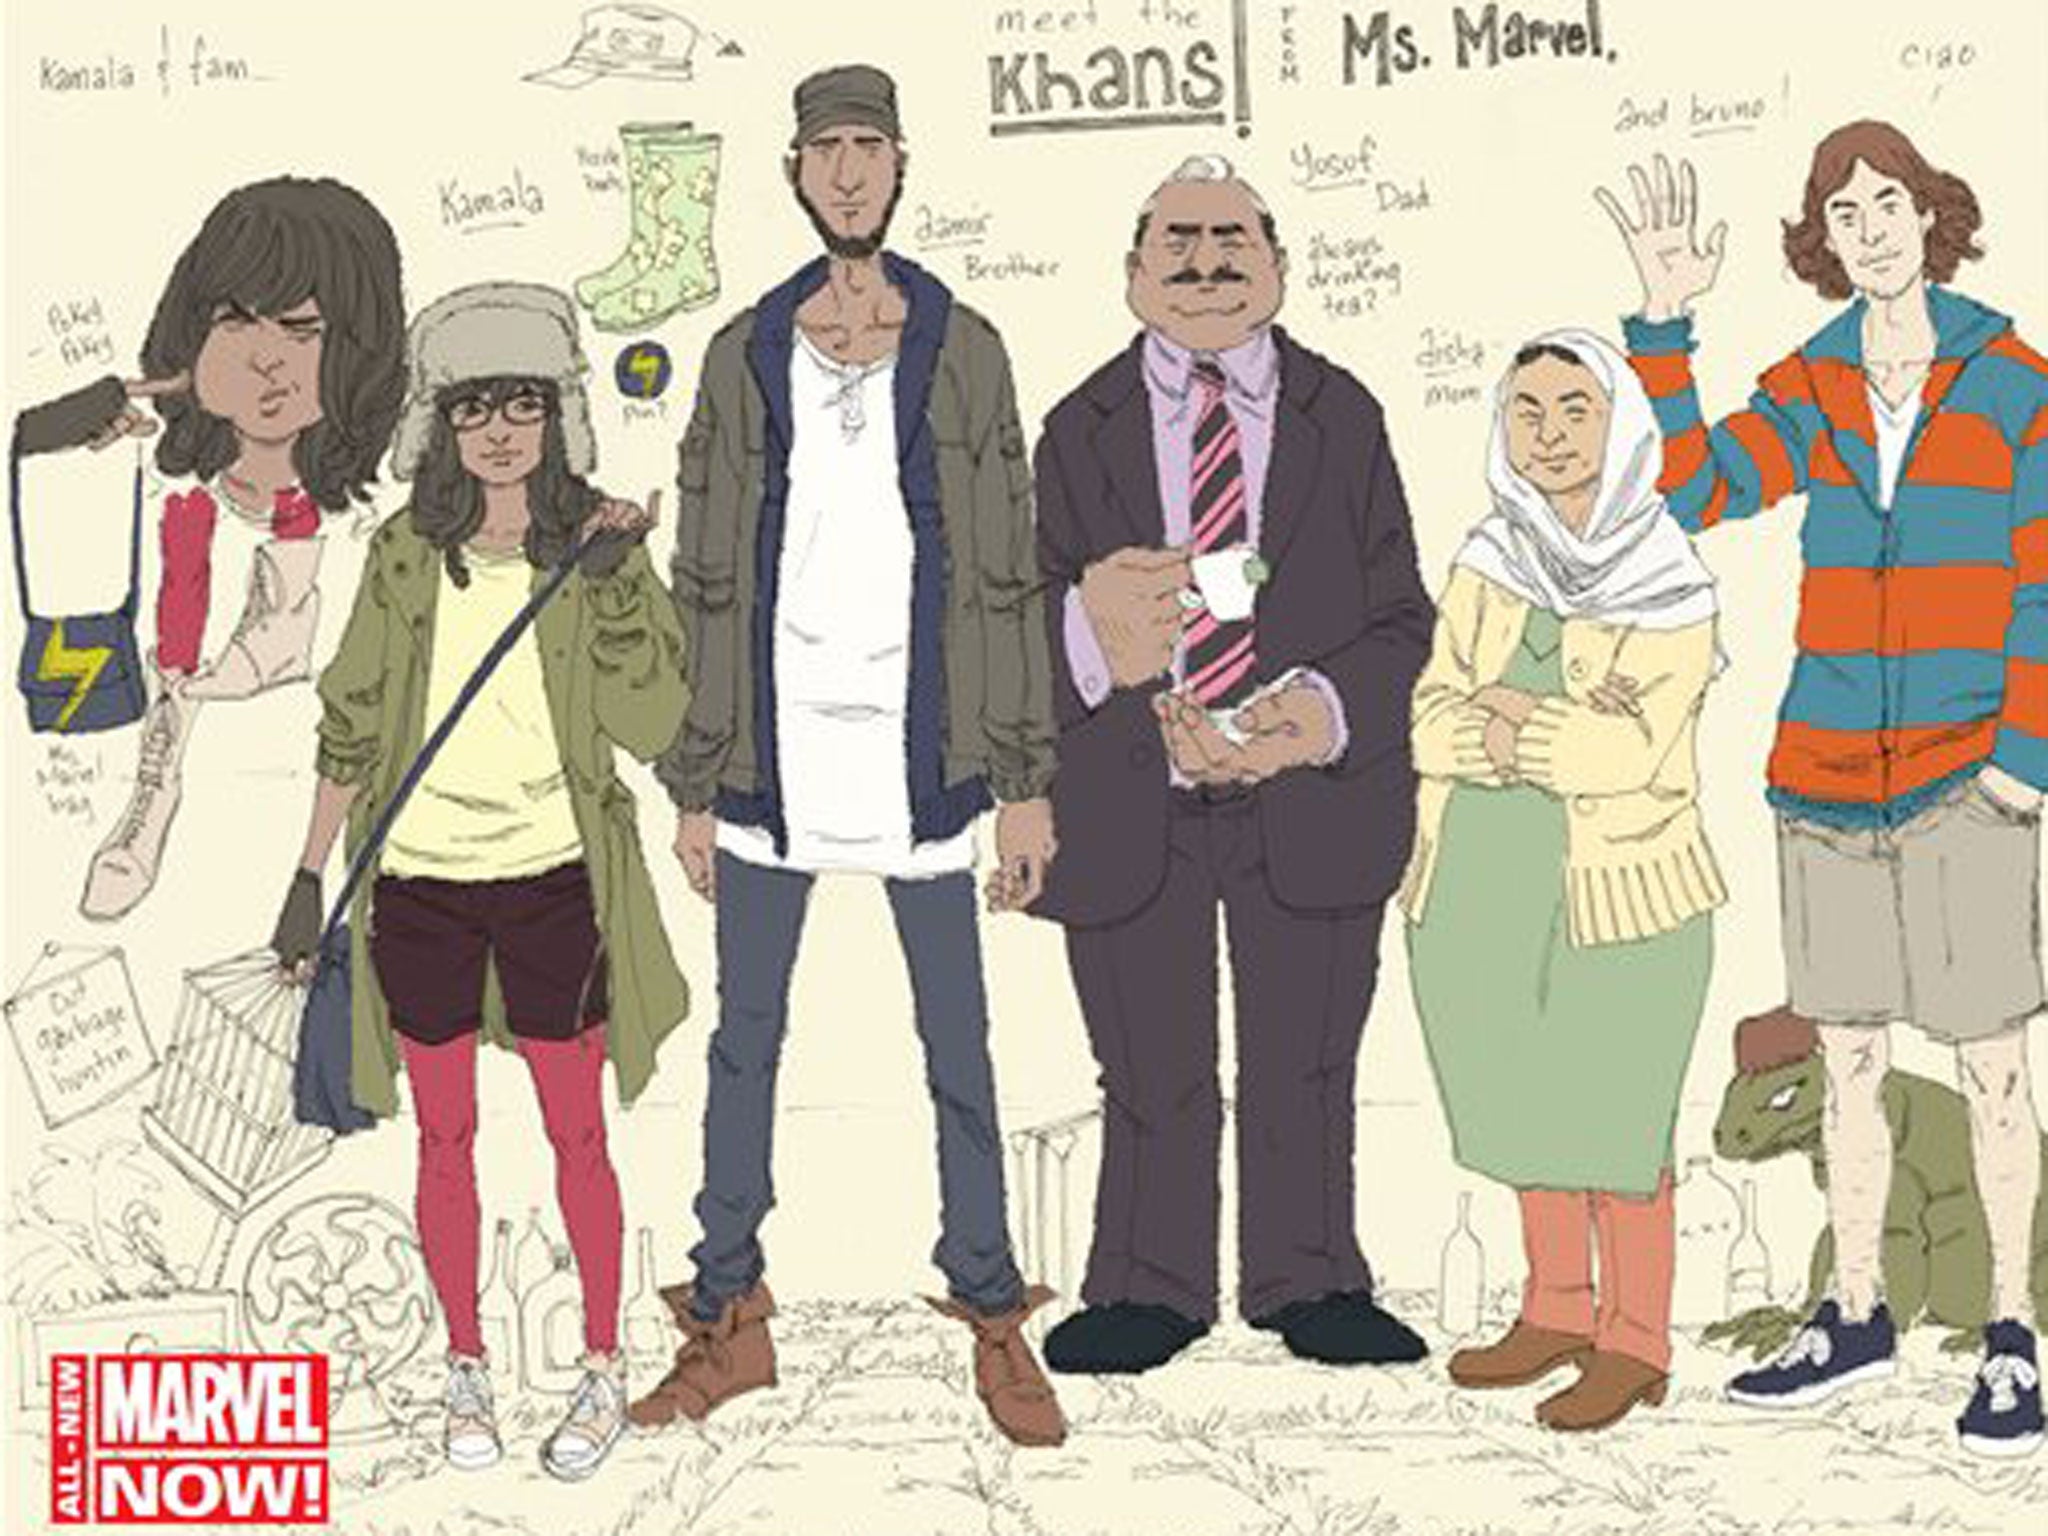 Kamala Khan, second from left, with her family and her friend Bruno. They're the cast of the New Ms. Marvel from Marvel Comics